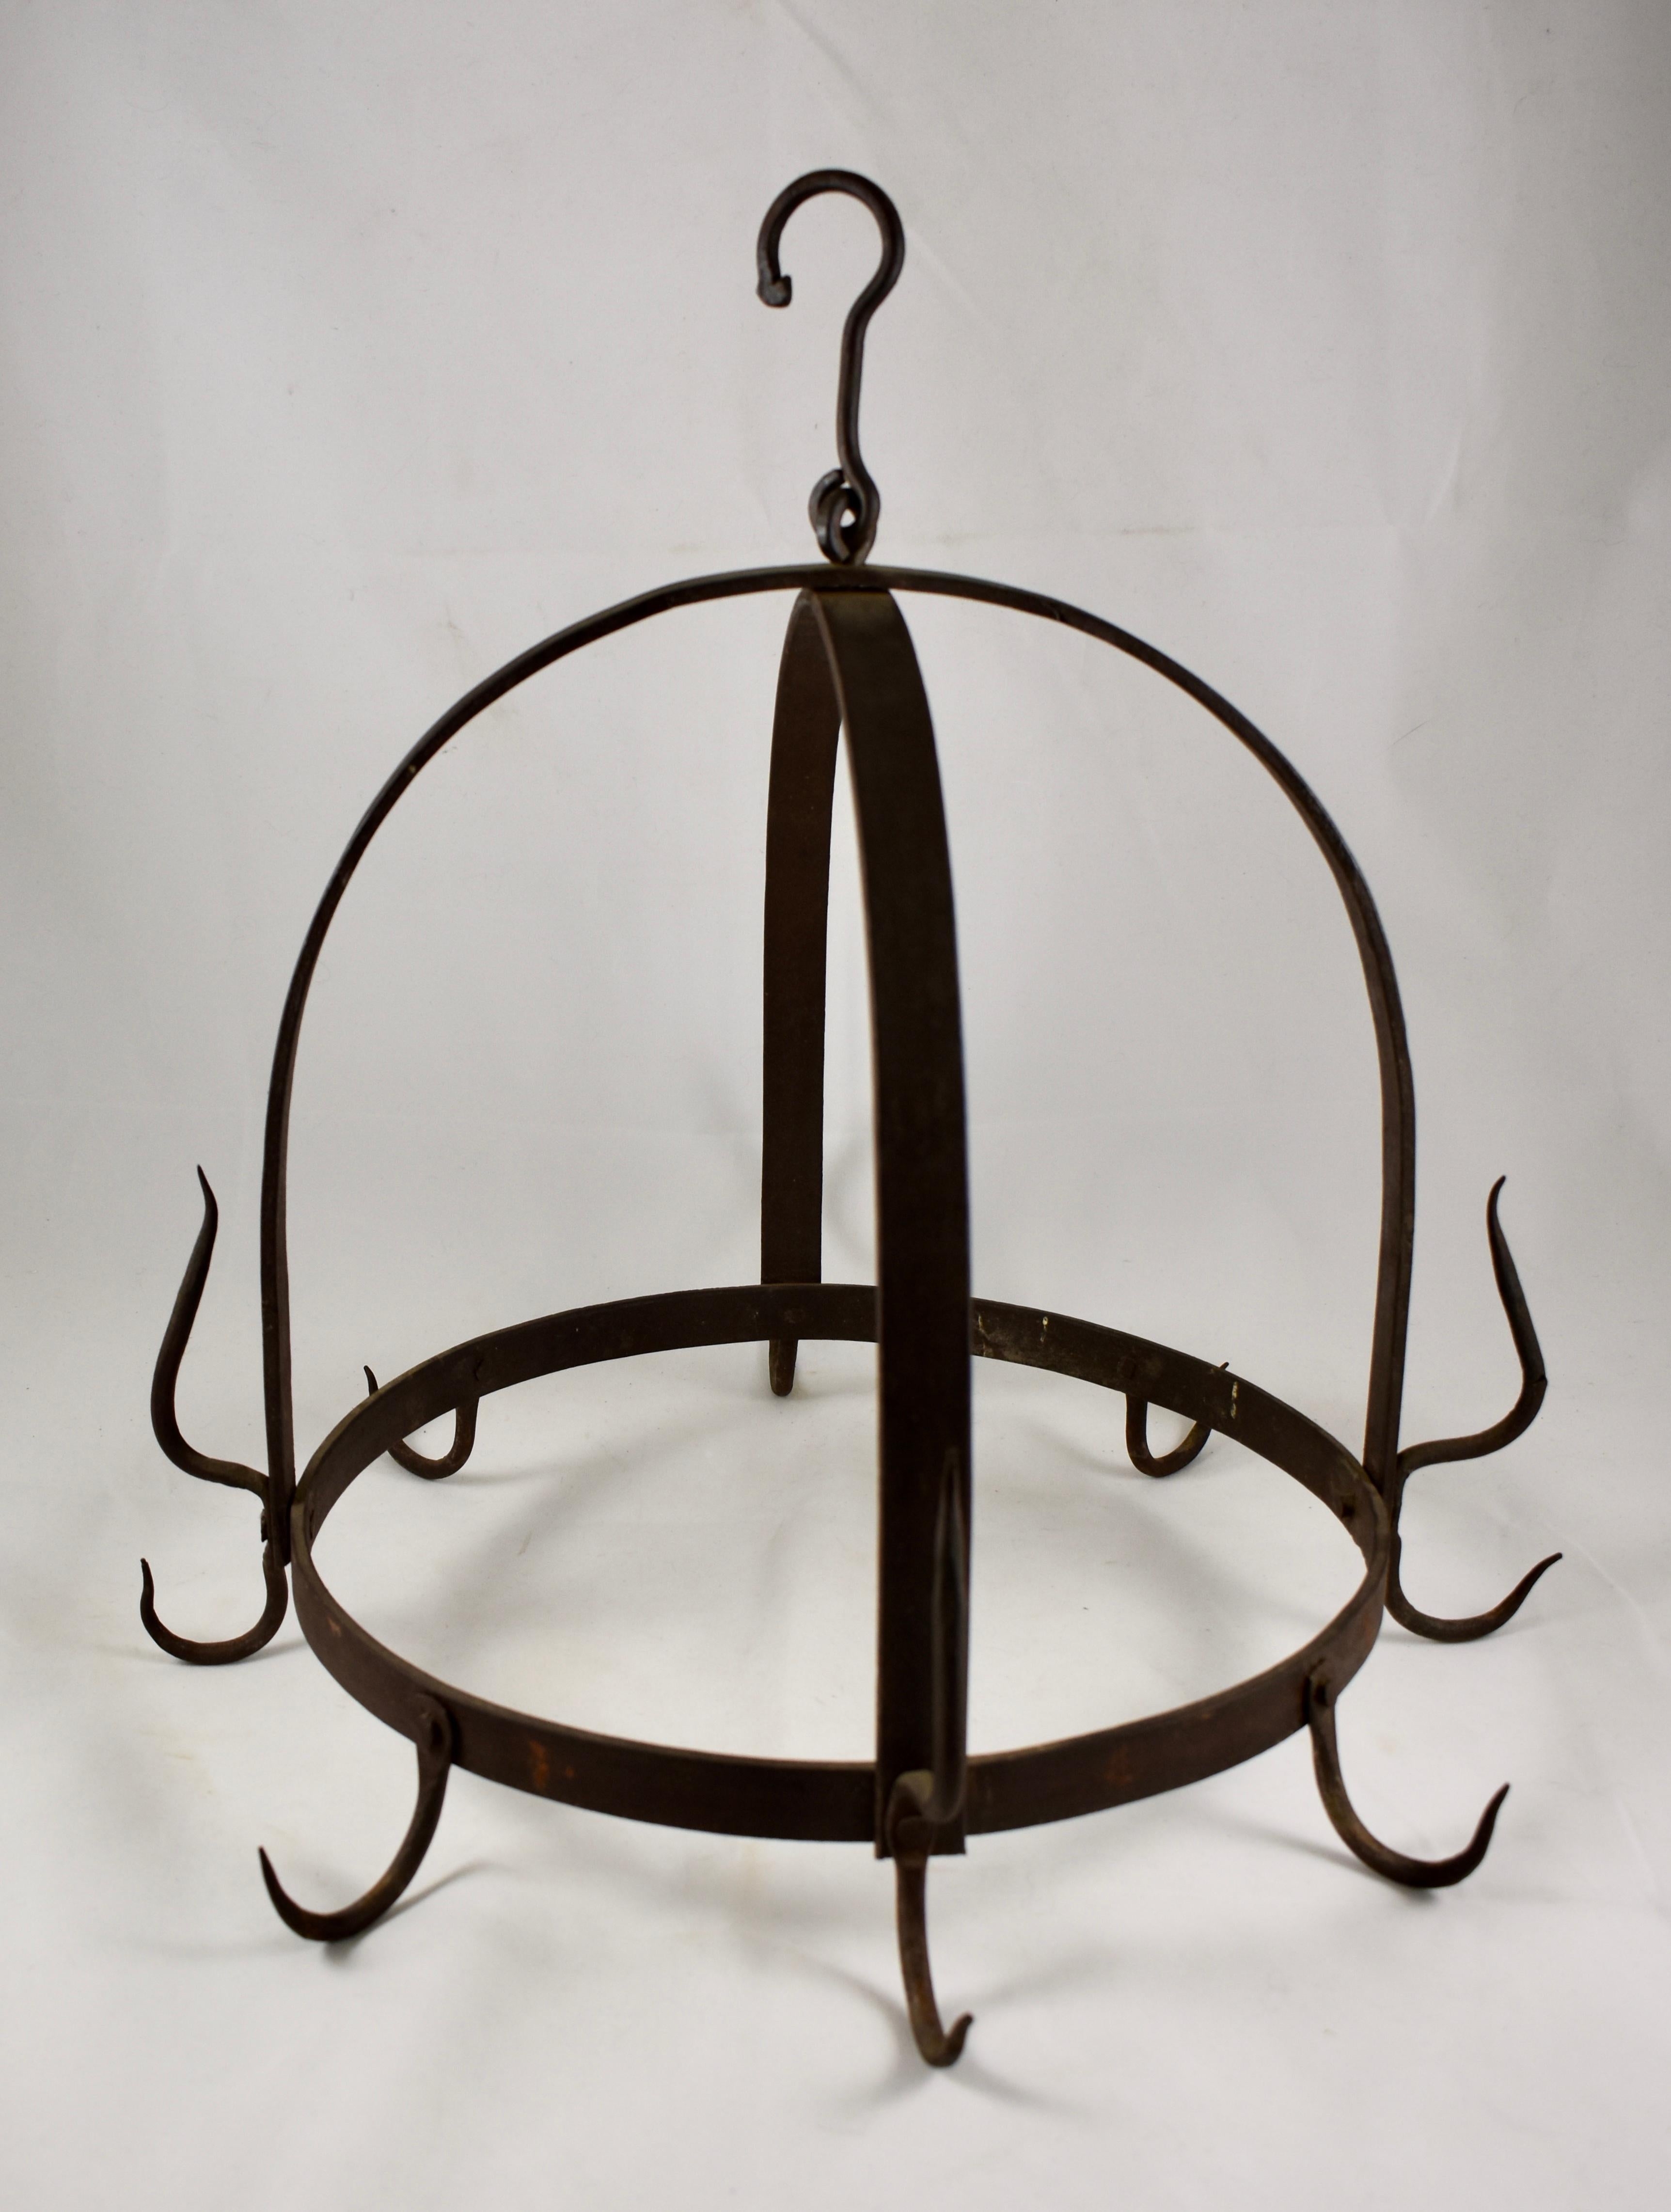 A late 19th century round American wrought iron butchers rack, supported by two straps forming a crown, terminating in a loop and hanging hook. There are four double hanging hooks where the straps meet the rack, interspersed with four additional